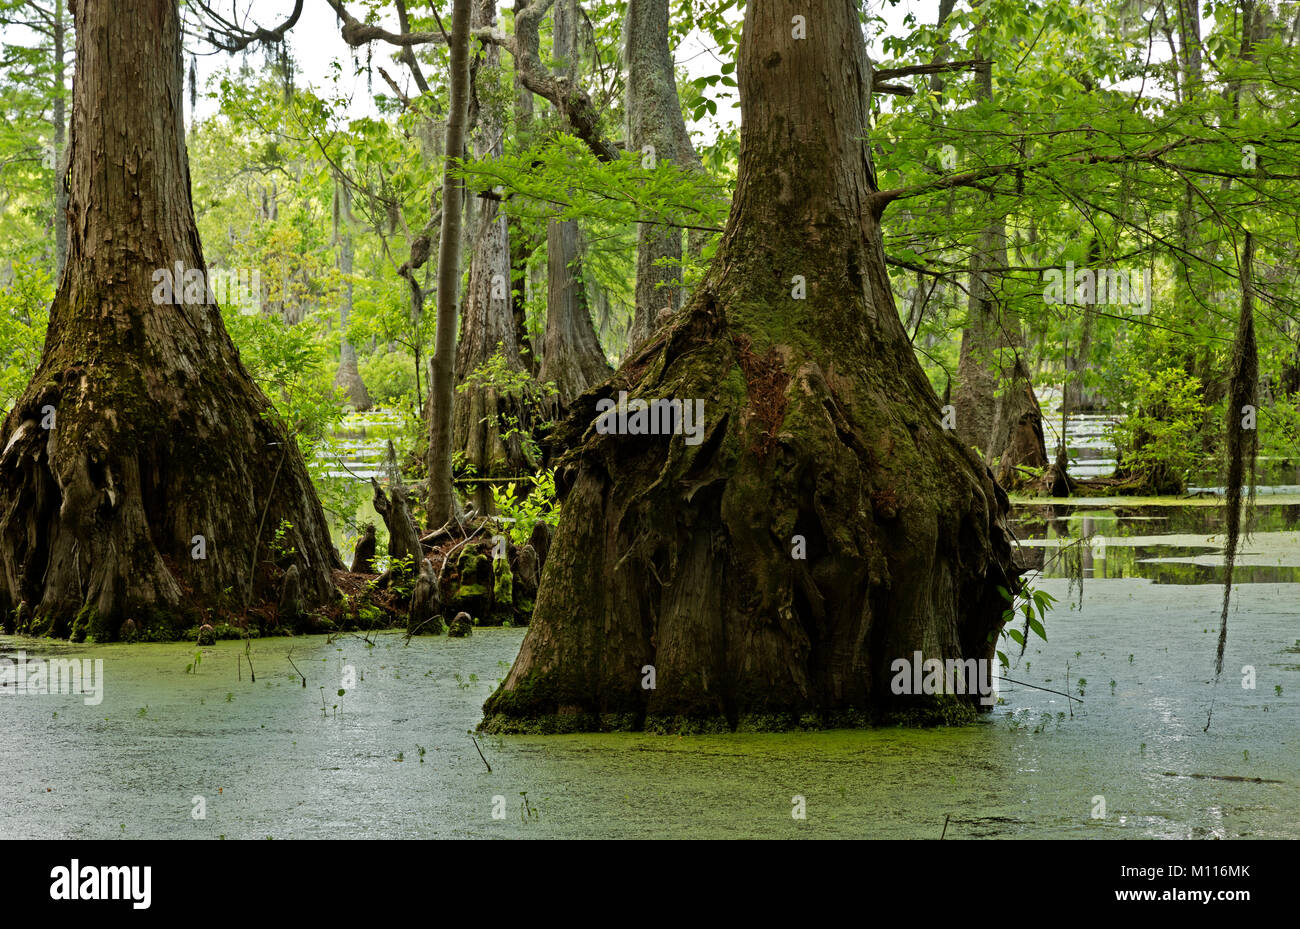 NC01448-00...NORTH CAROLINA - A cypress swamp and plenty of duckweed in the still waters of Merchant Millpond in Merchant Millpond State Park. Stock Photo